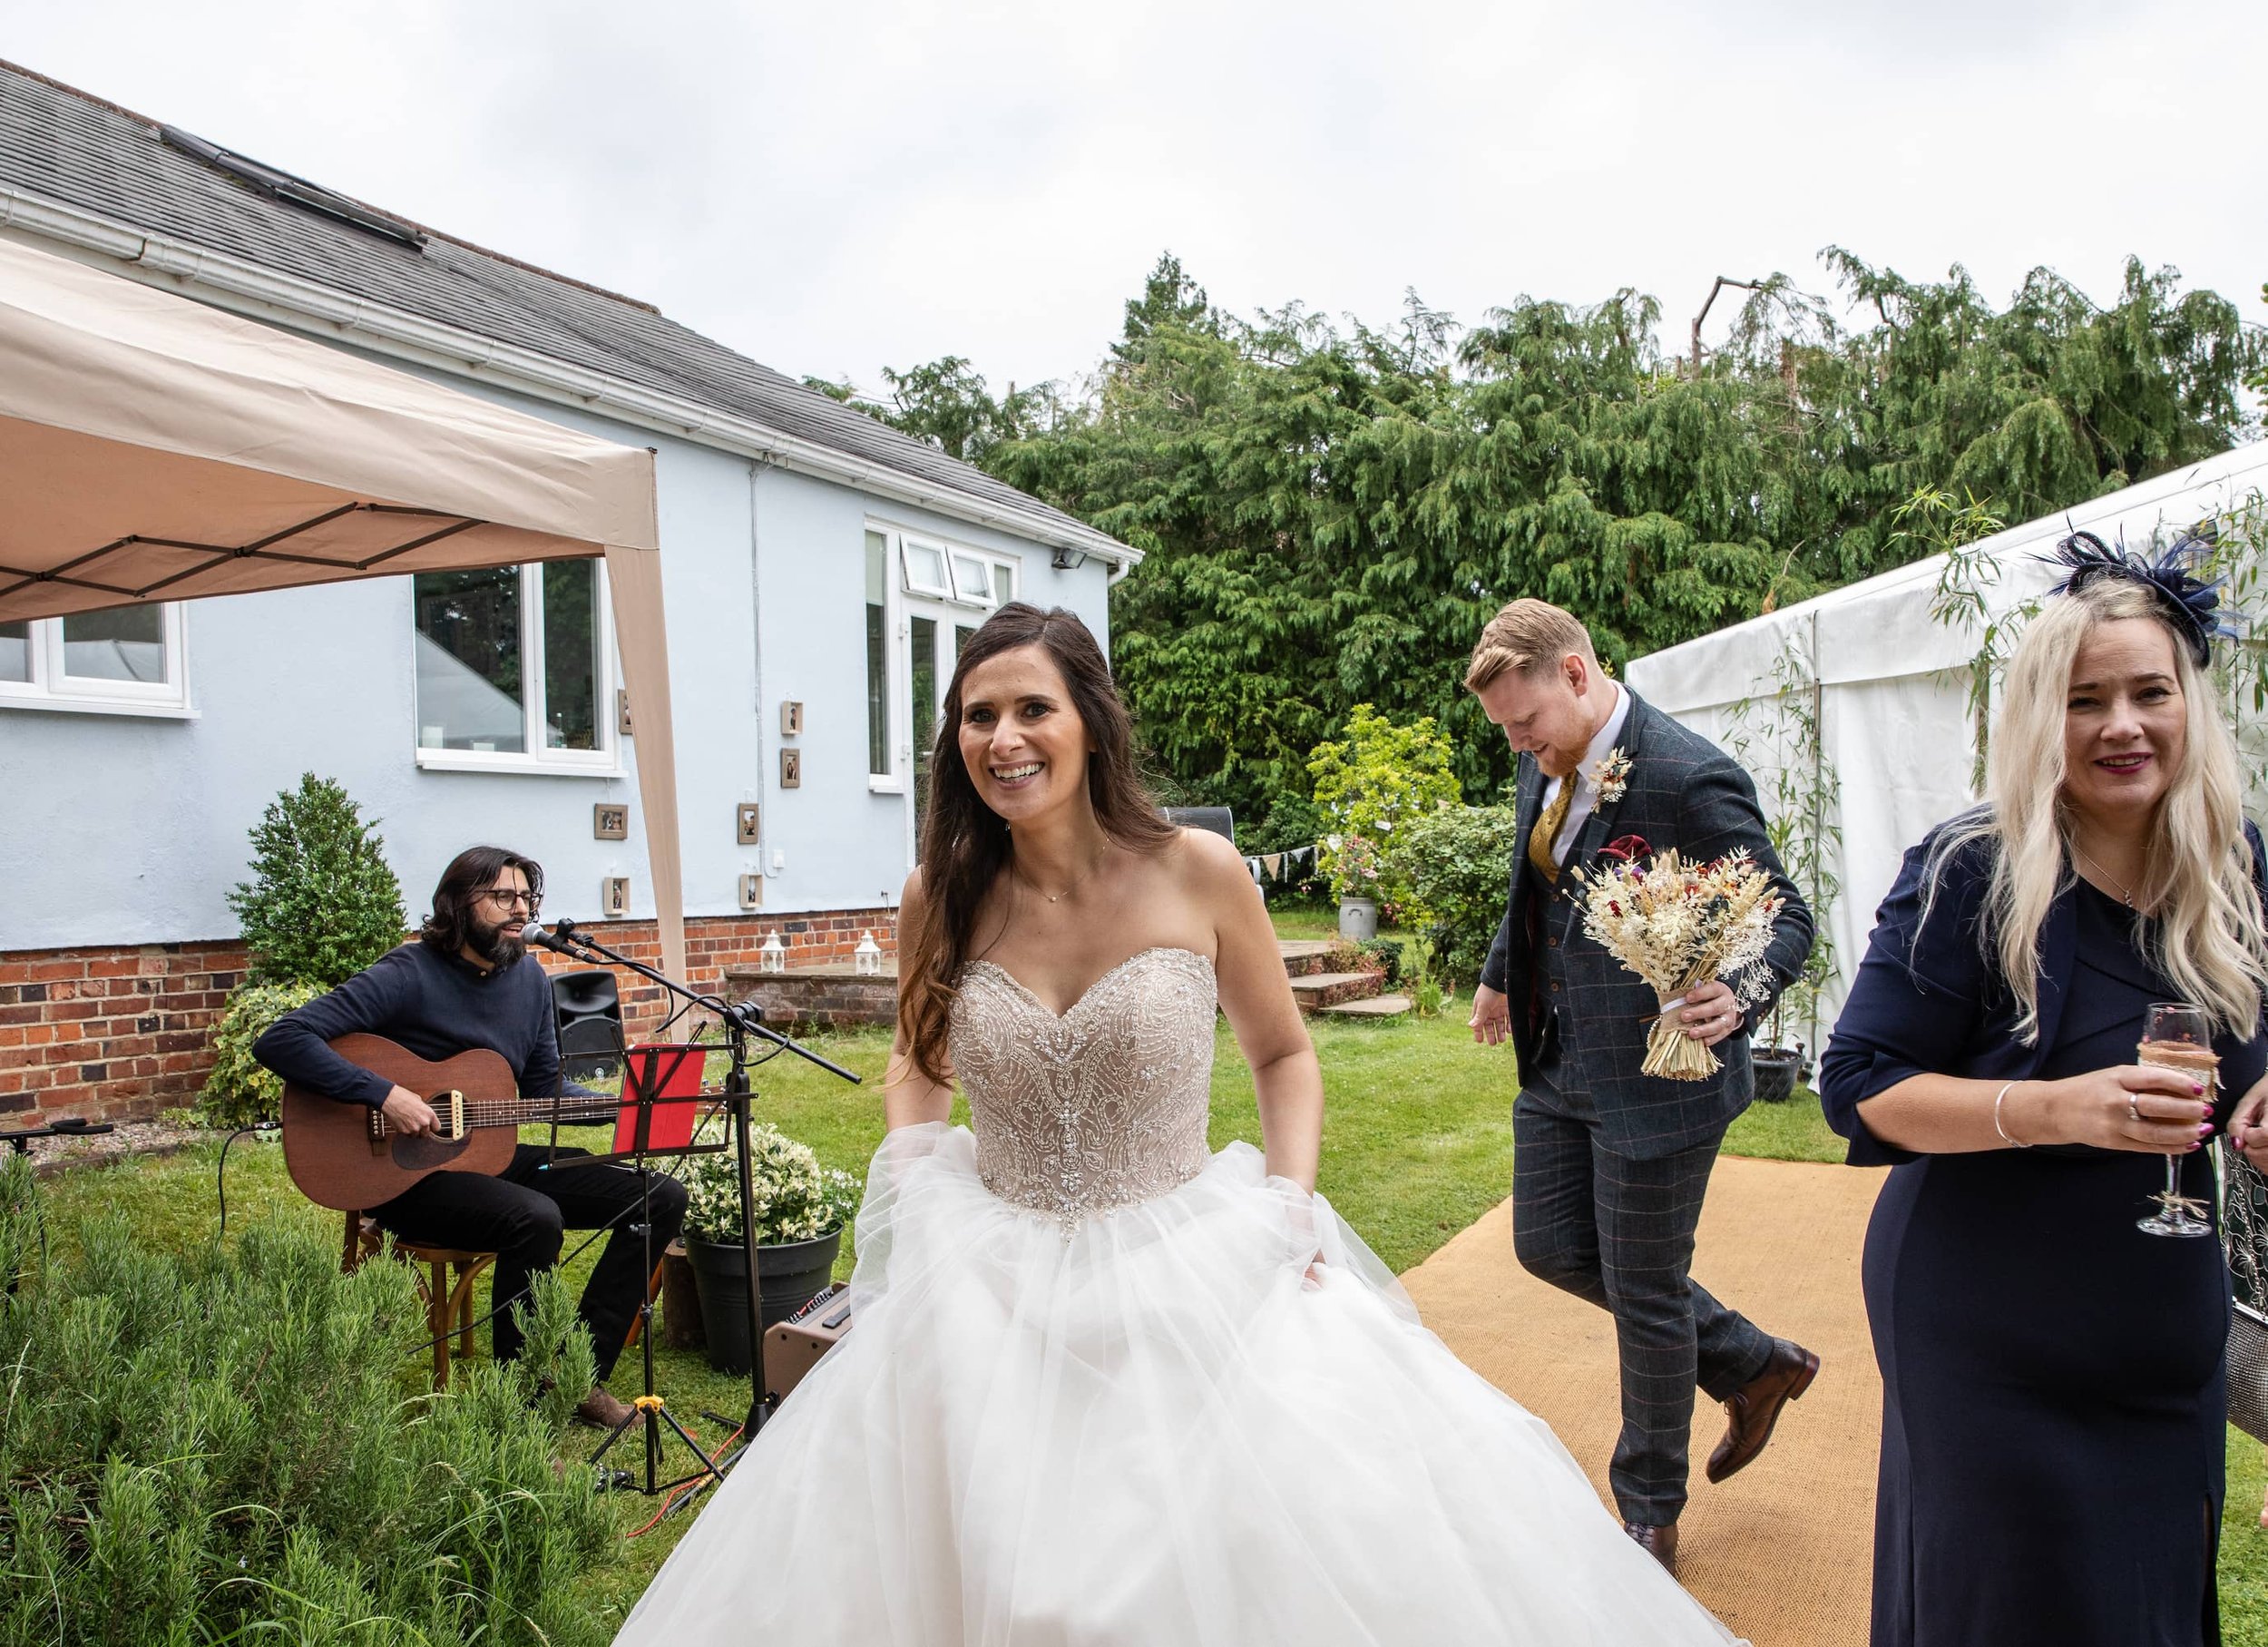  Acoustic musician can be seen playing the guitar and singing outside as the bride and groom walk past at their evening reception.  Photo by Lorna Newman Weddings 